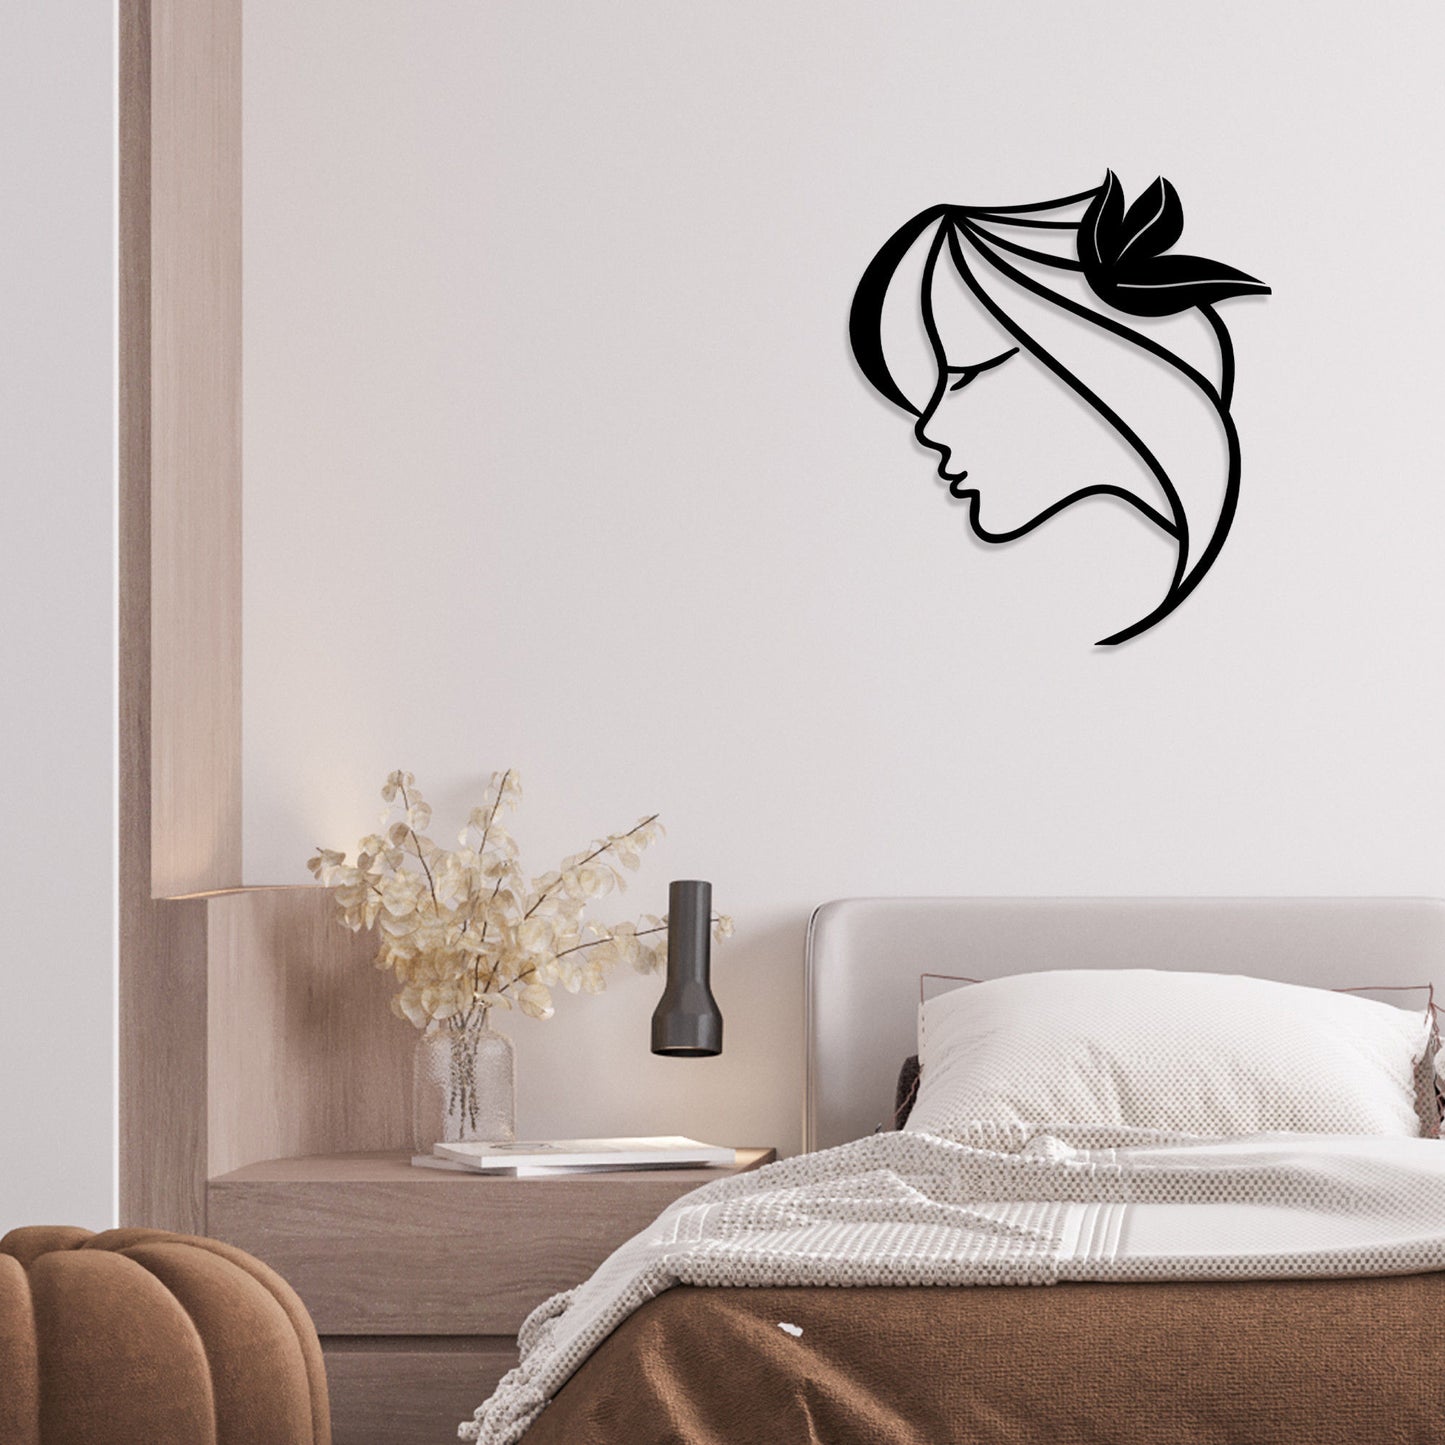 Woman With The Leaf - Decorative Metal Wall Accessory